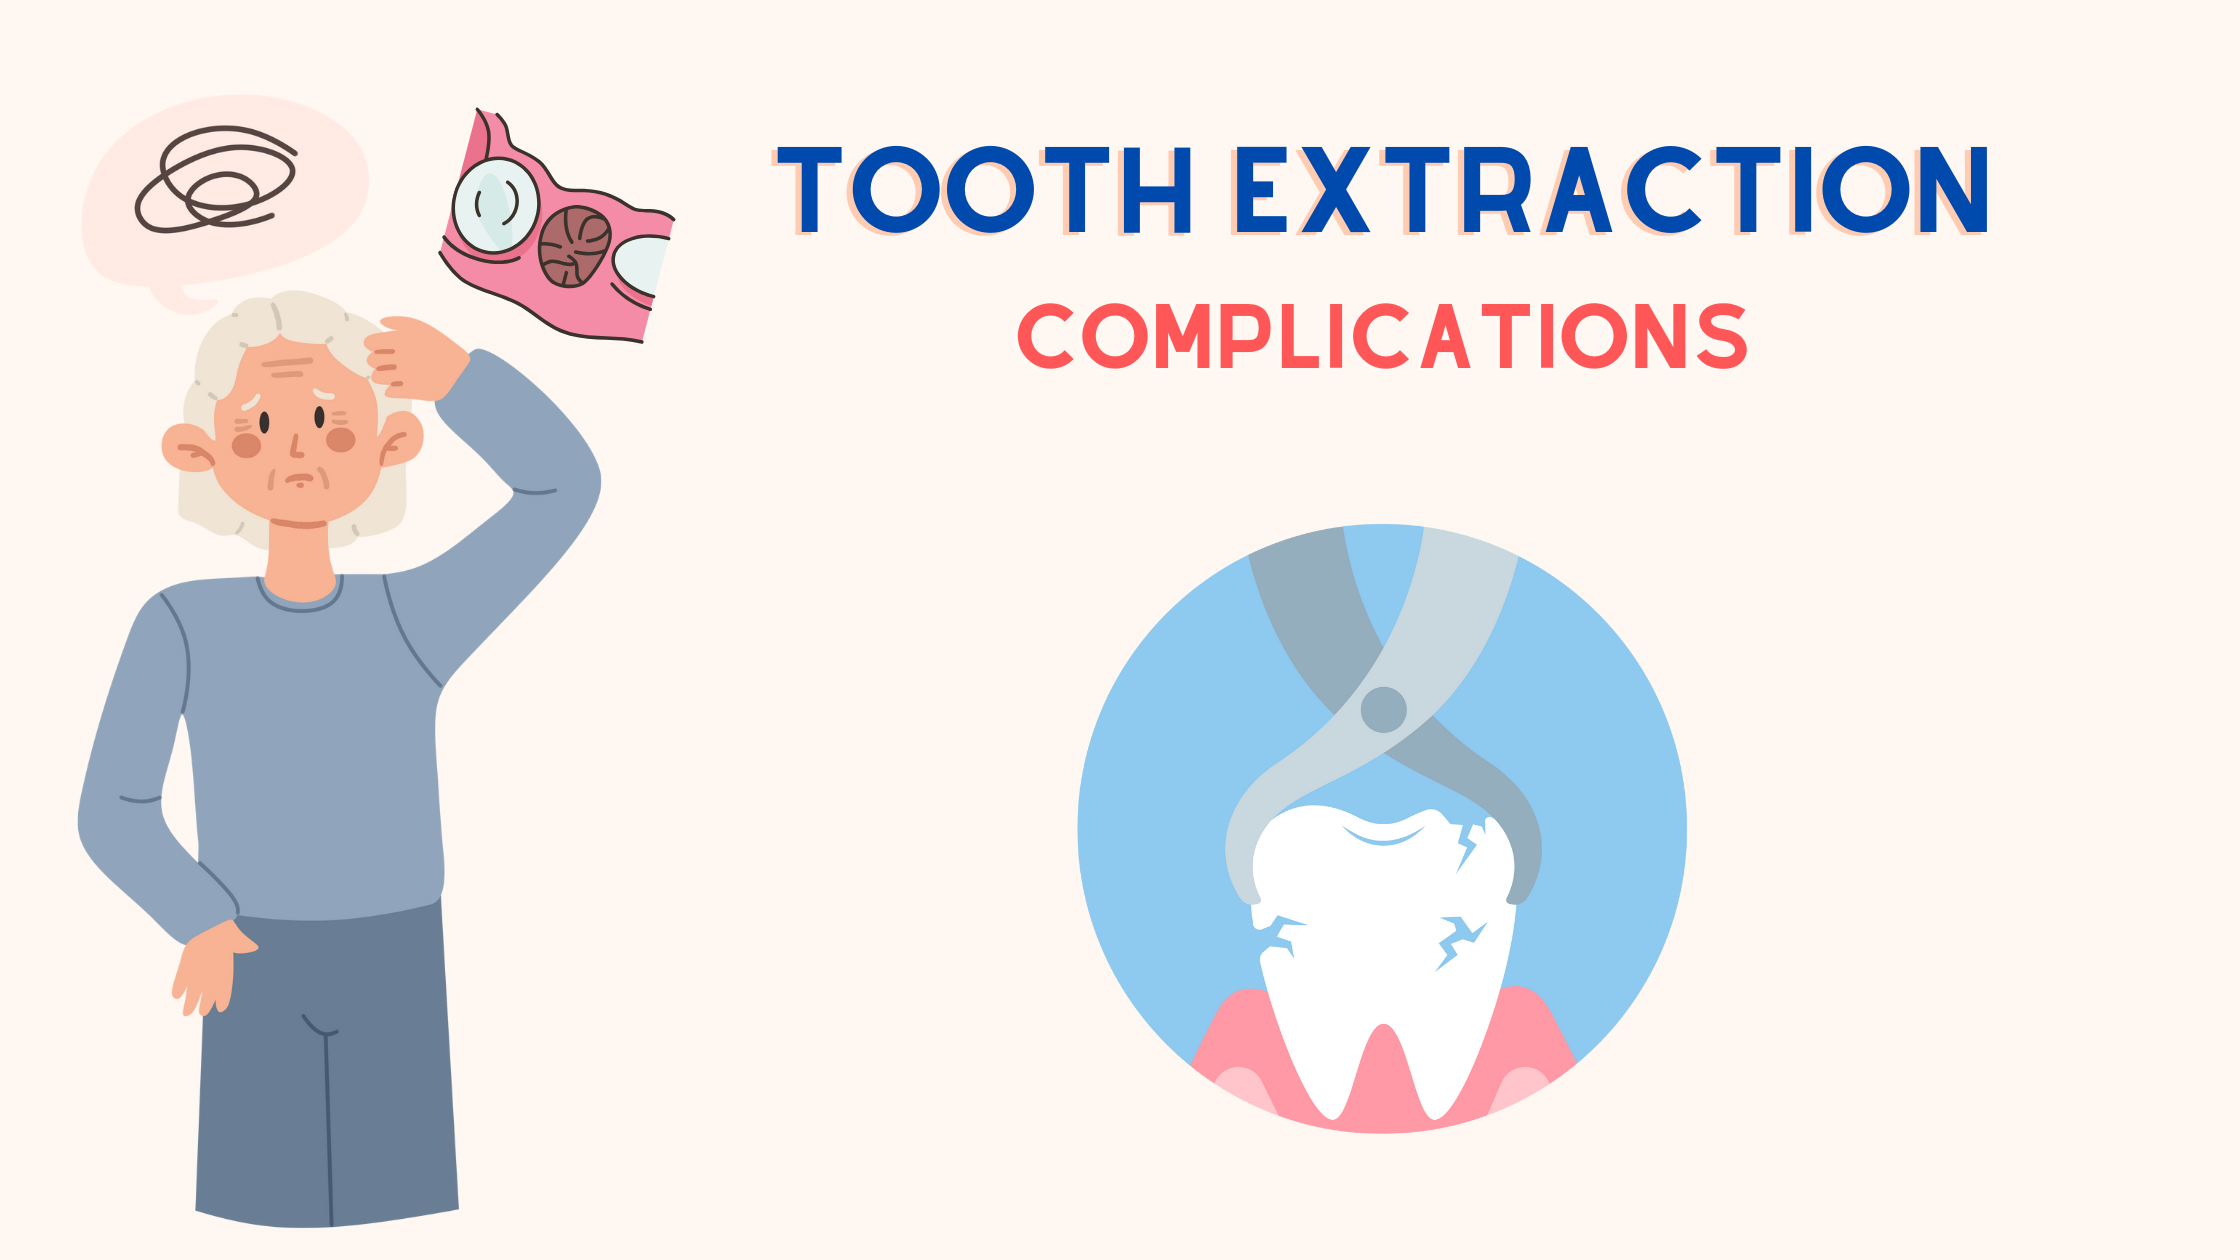 Complications of tooth extraction procedure